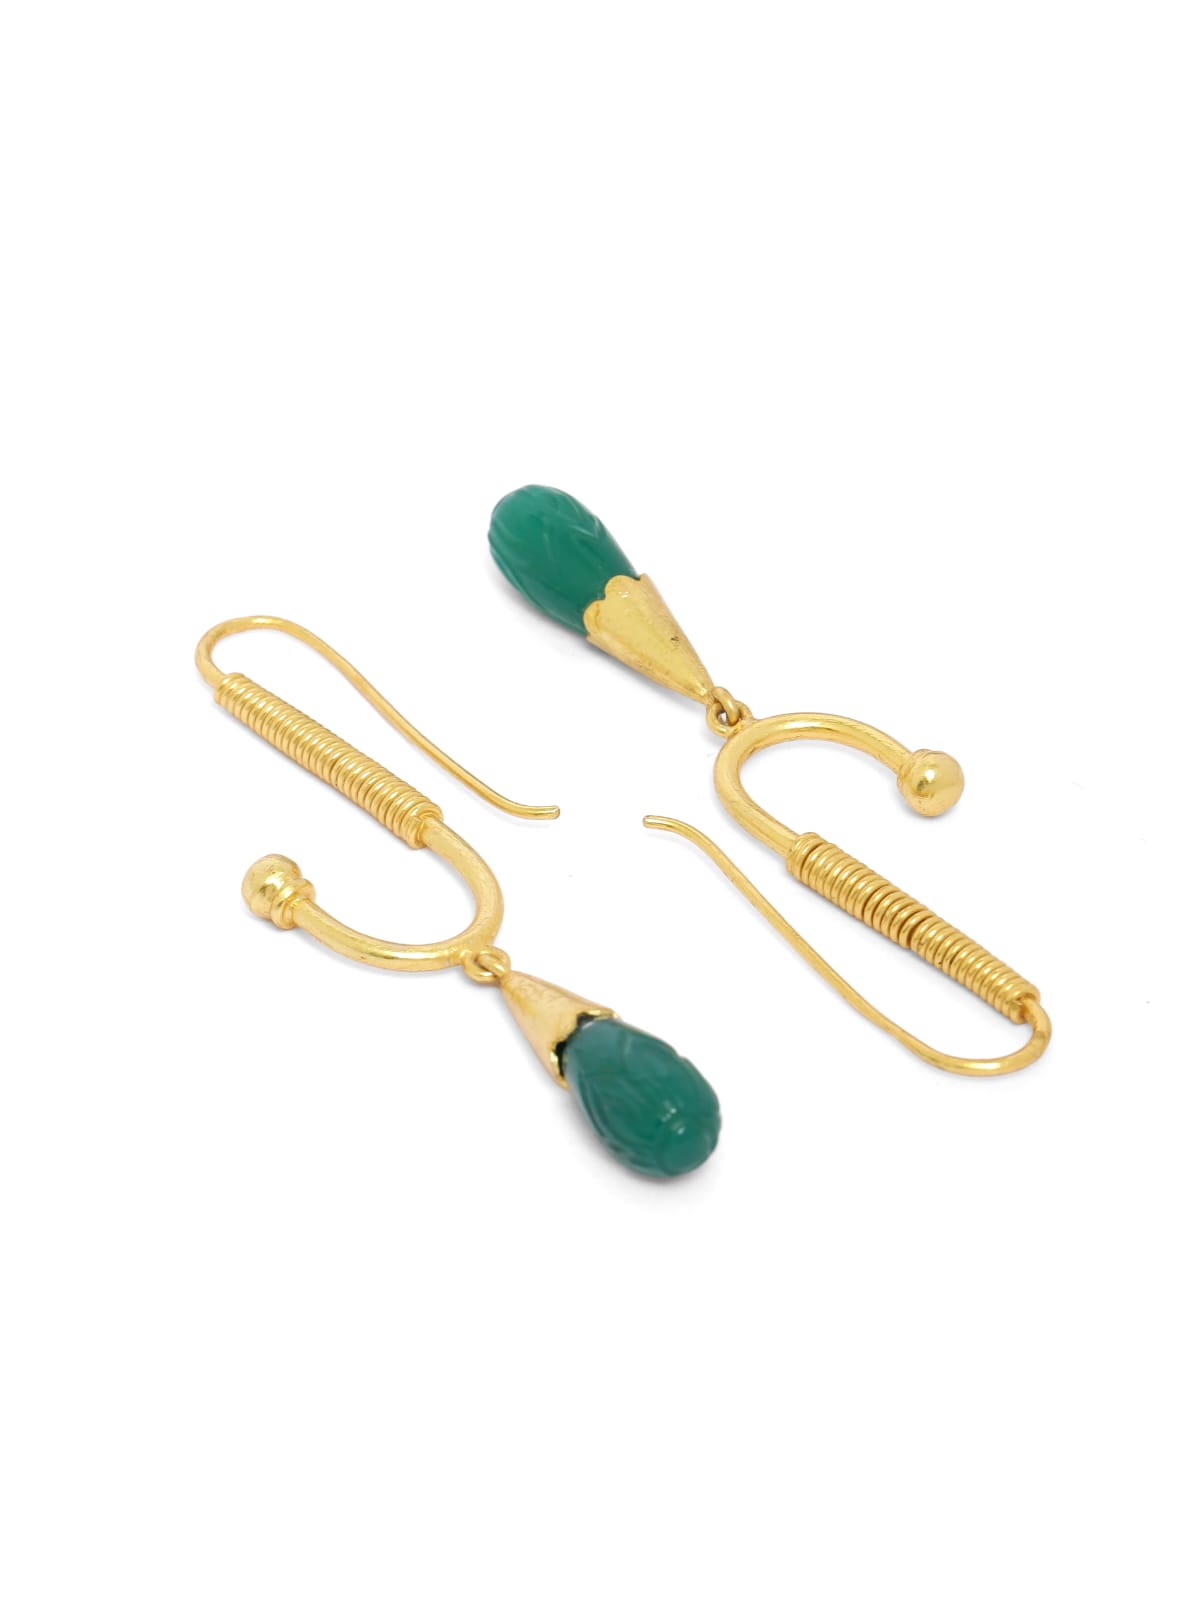 Green onyx drop gold plated
Length 55 mm